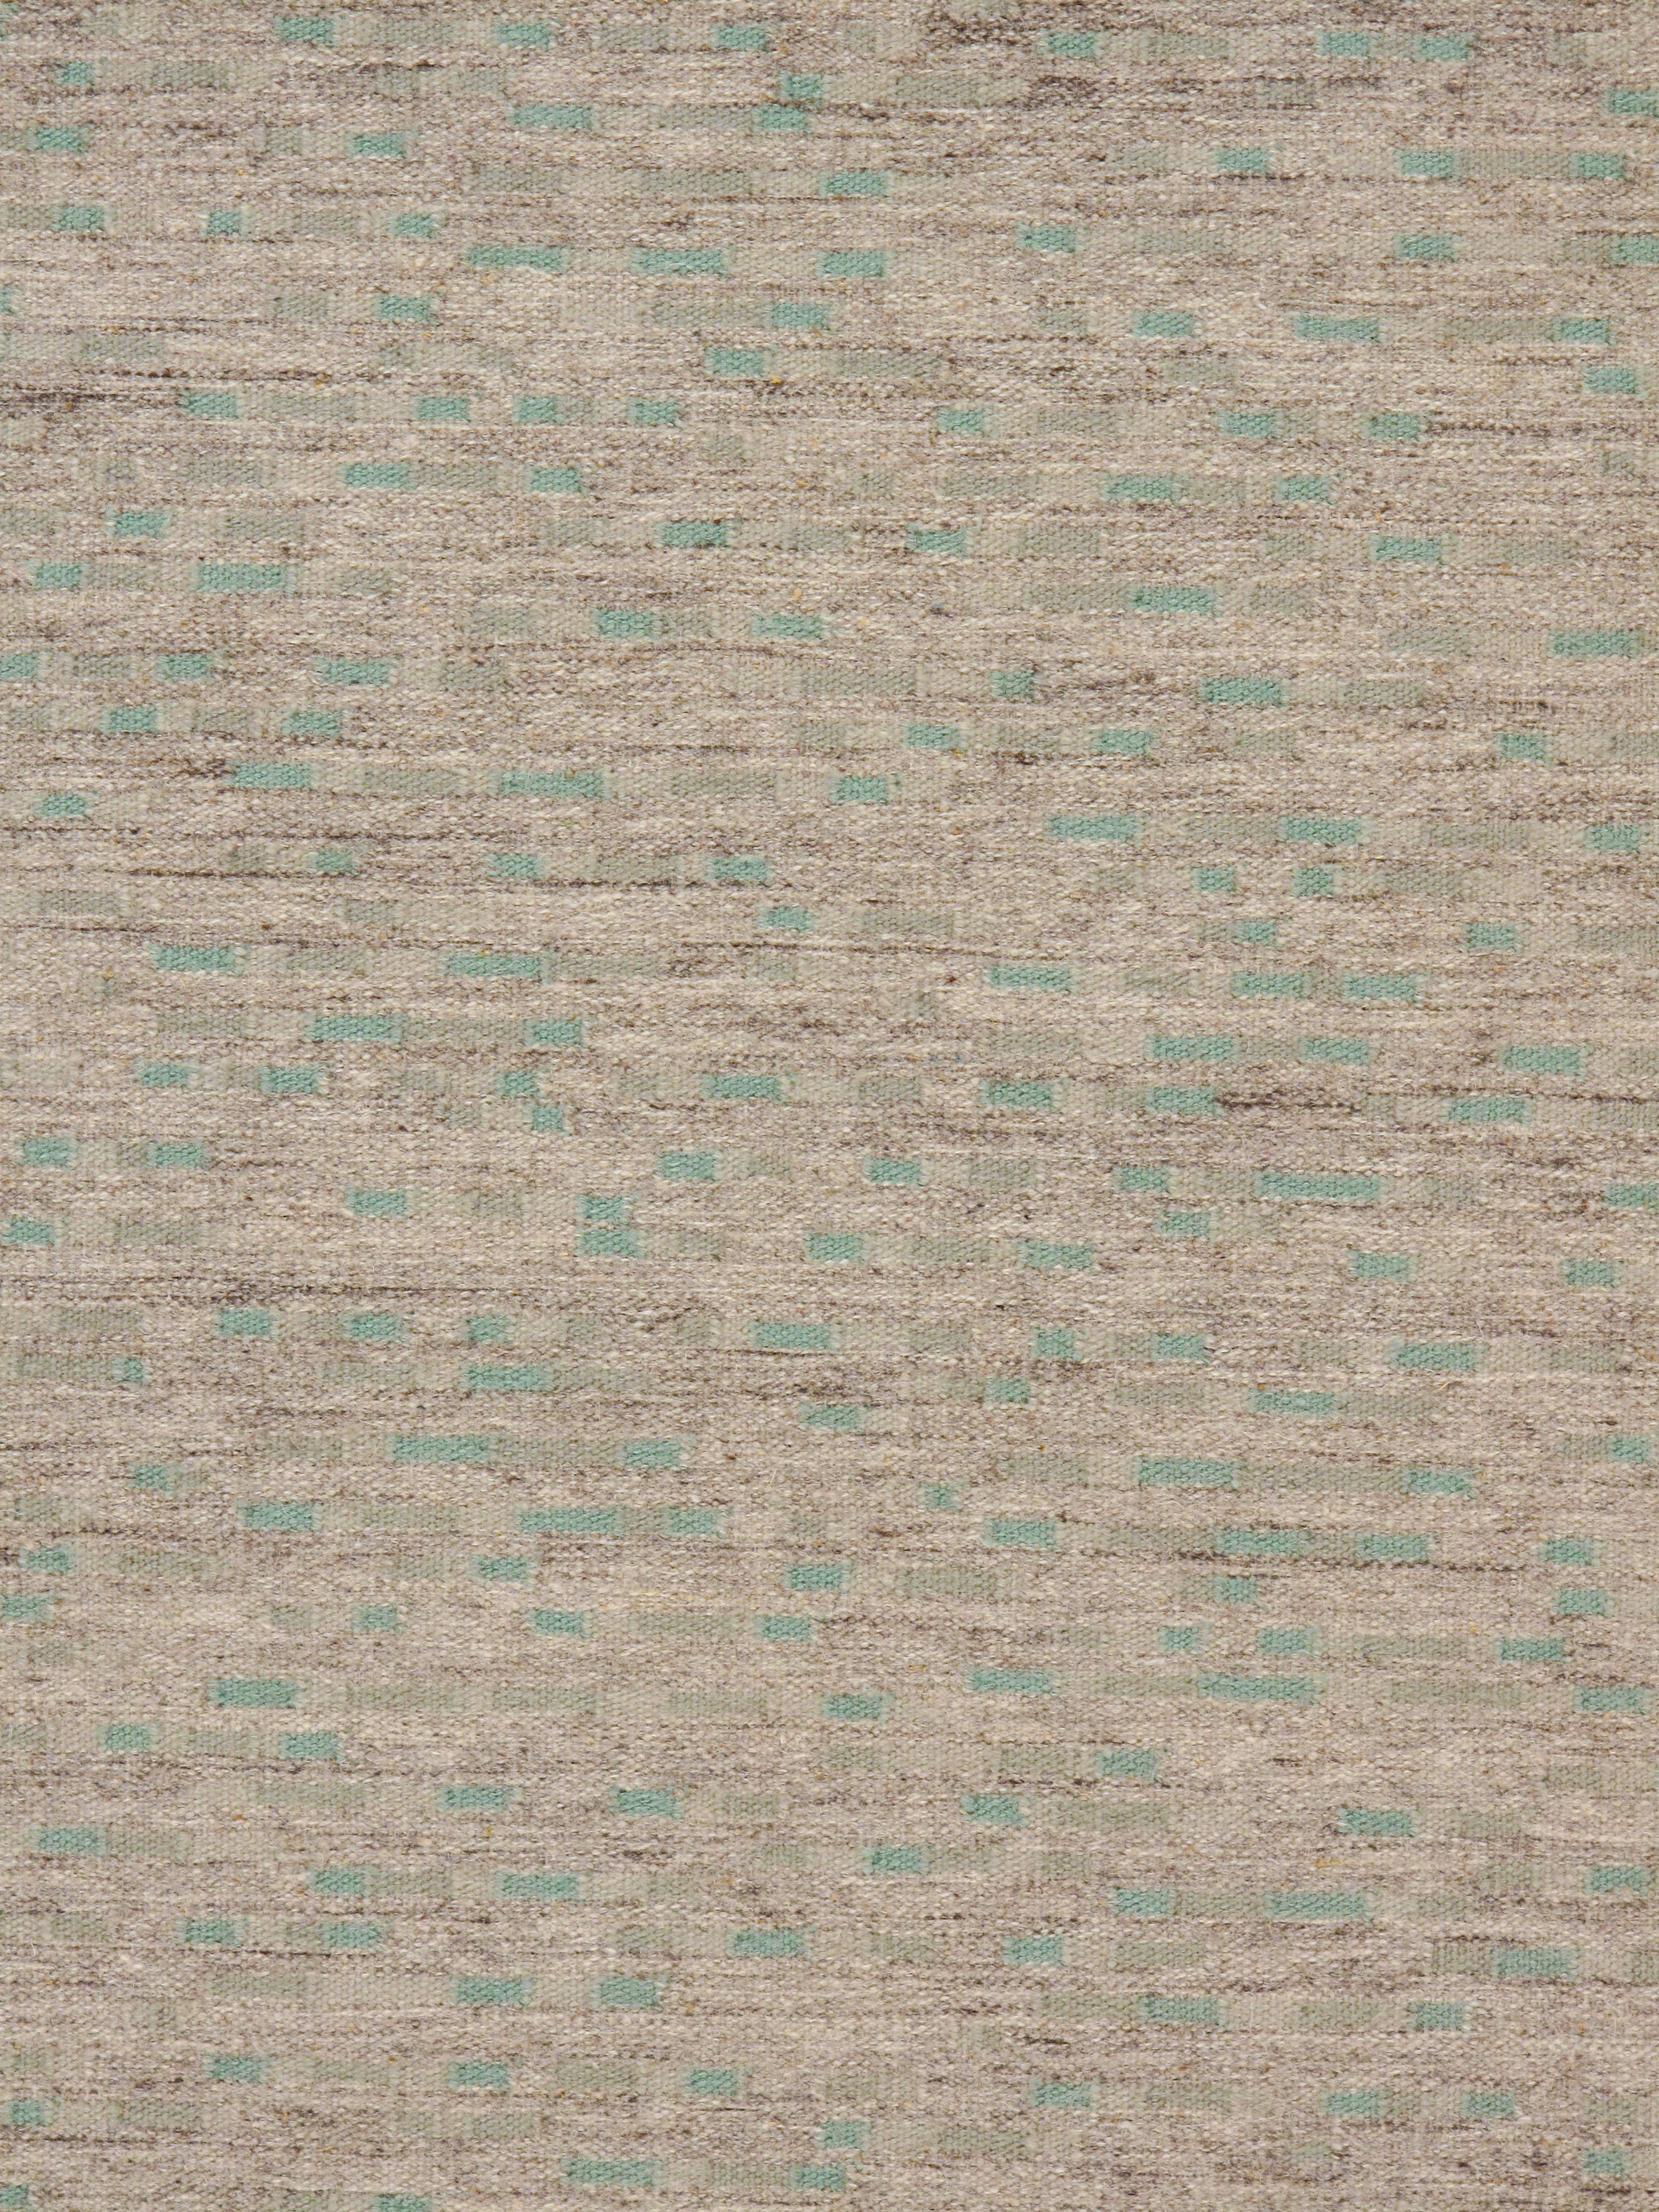 New Scandinavian Swedish Style Flatweave Collection Deco Aqua Rug. Handwoven in India this Kilim has been styled on the clean and simple look of Swedish designs to create a rug that has a simplicity and boldness that gives a contemporary feel and